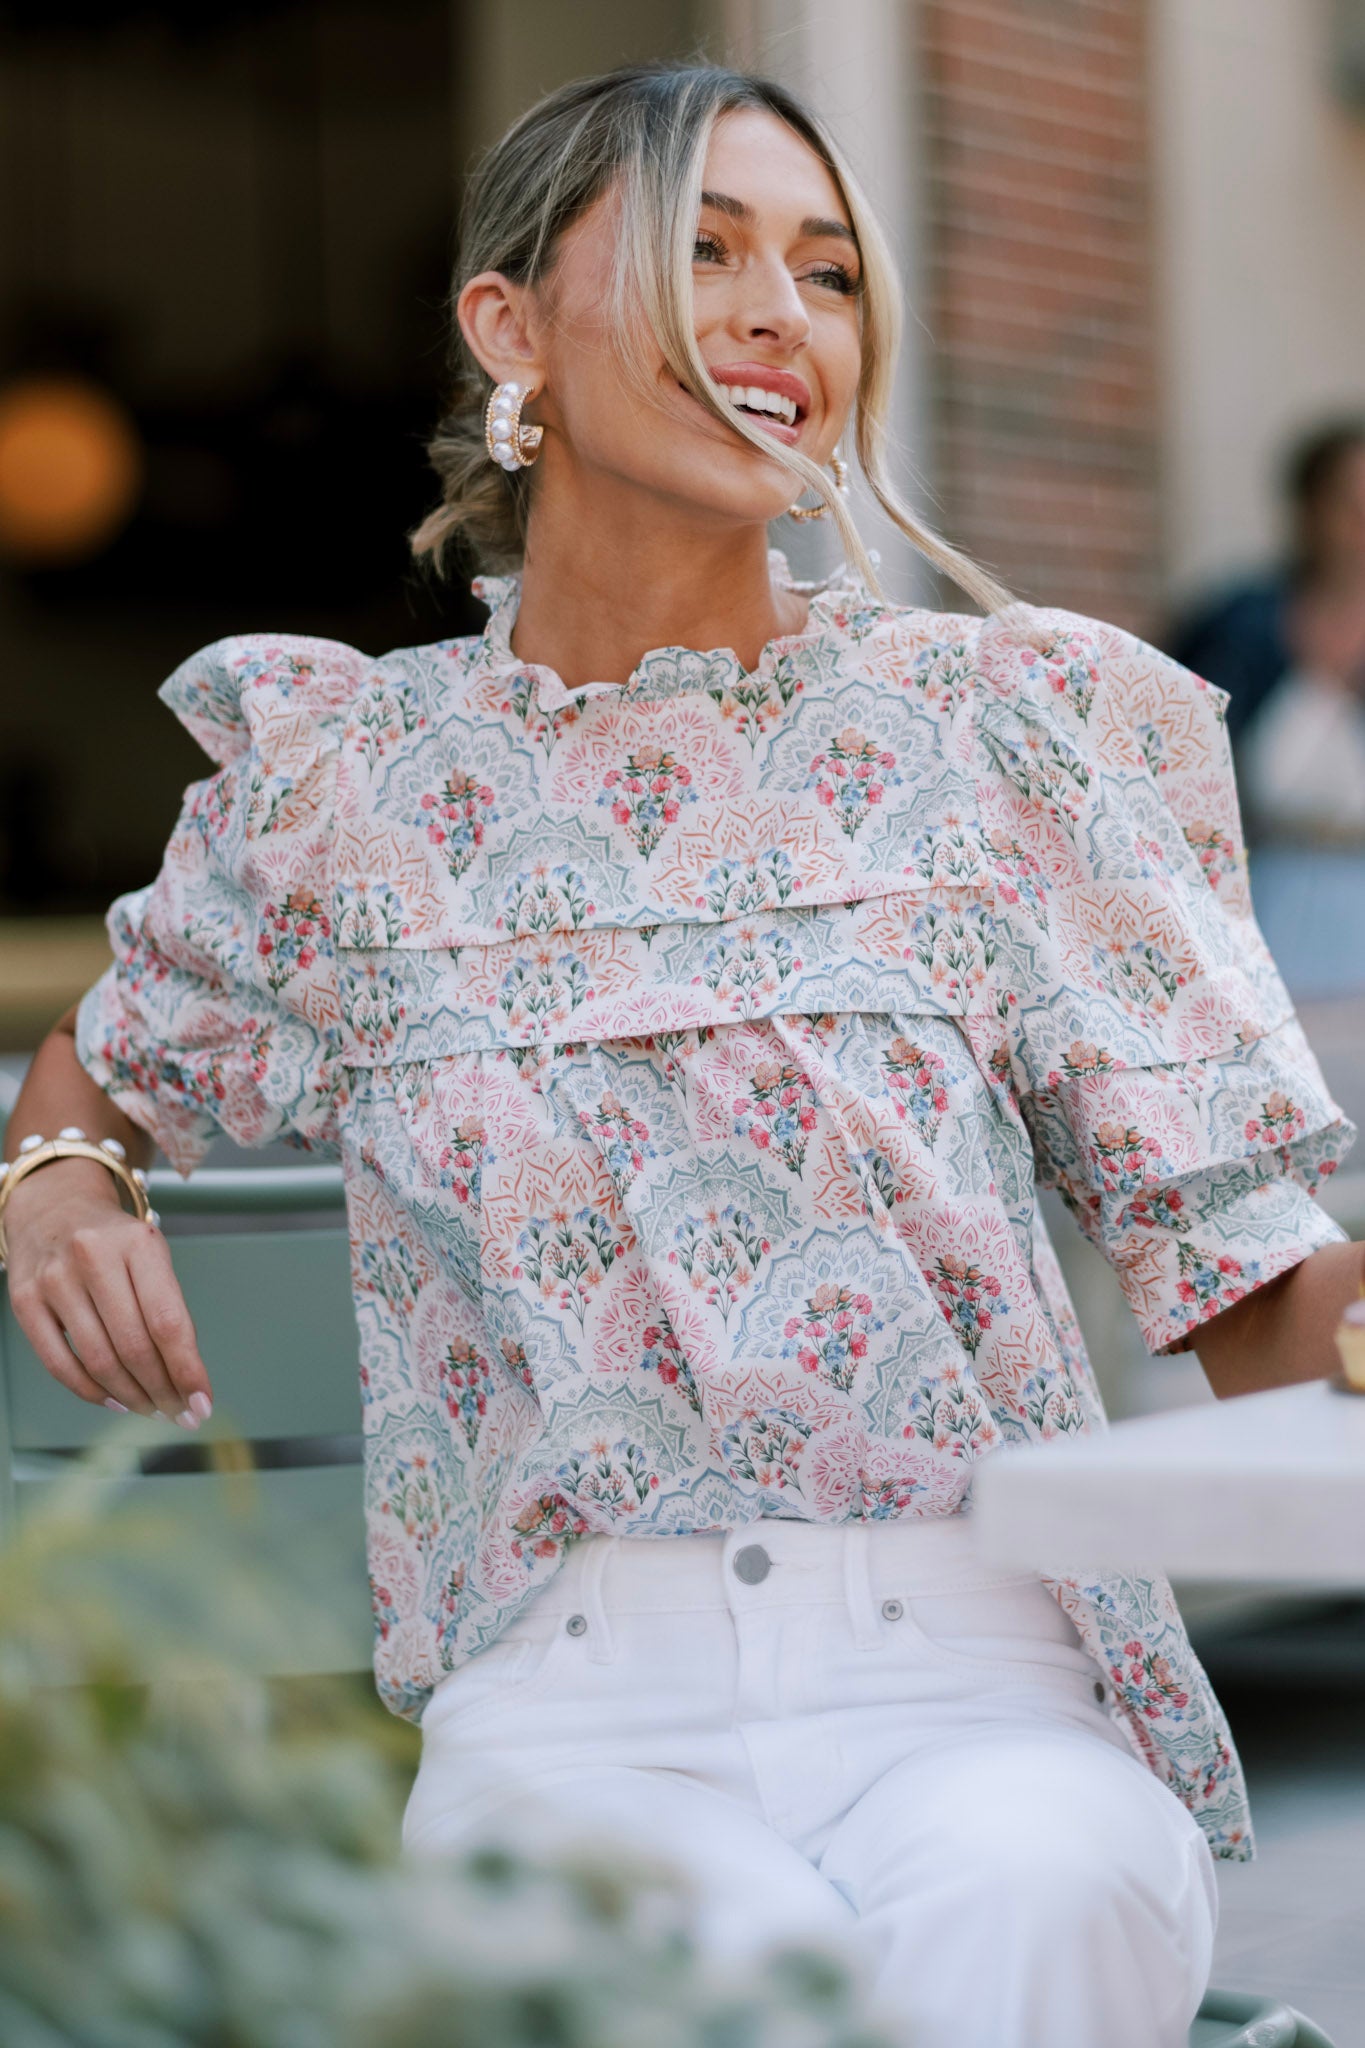 Pastel floral print top with a high neckline and ruffled details, featuring puffed sleeves and an intricate floral pattern.